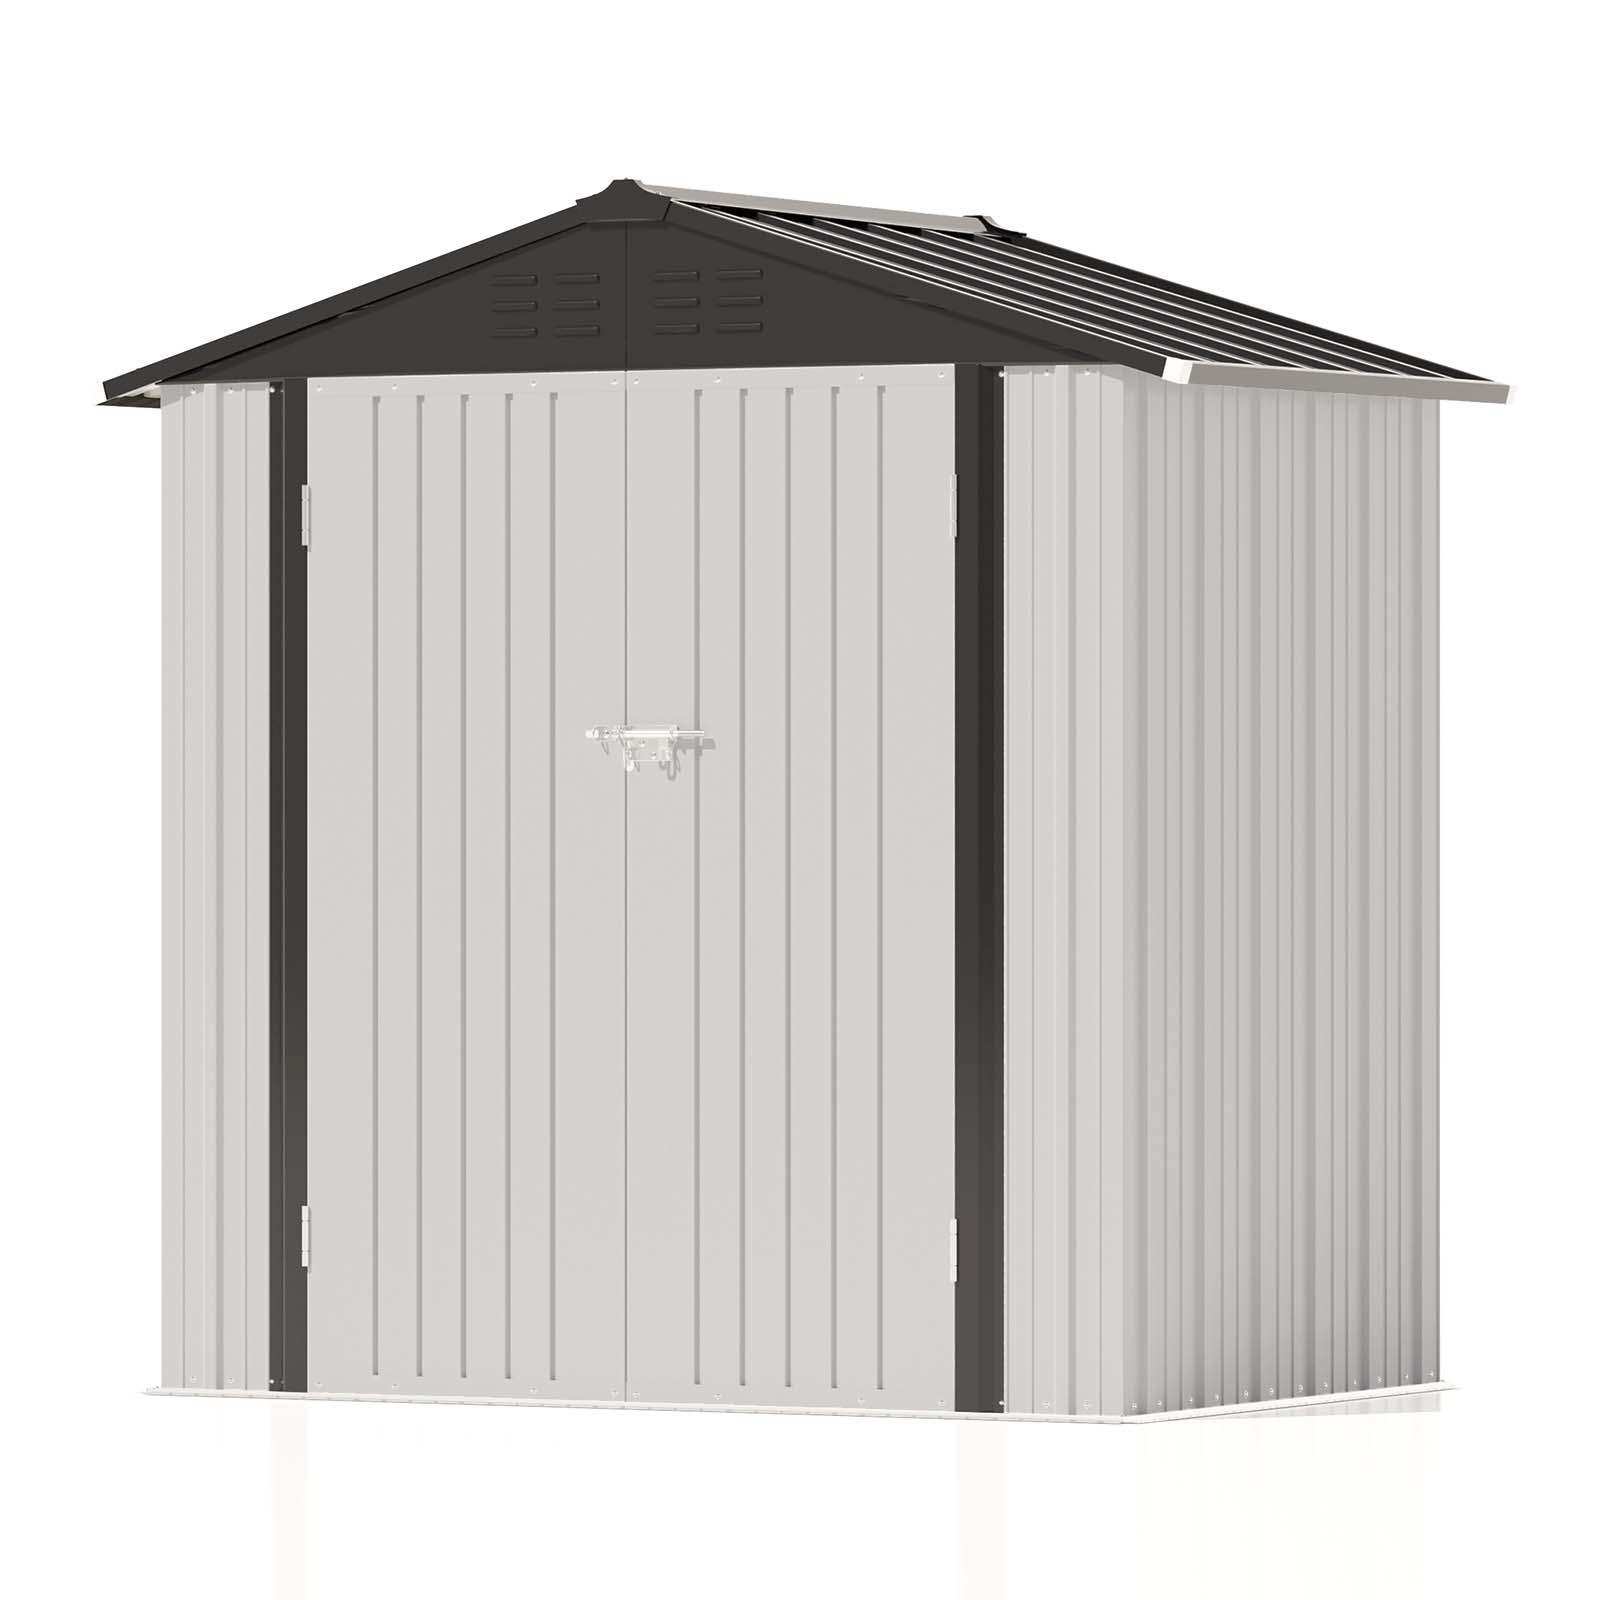 Patiowell 6x4 Metal Shed With Peak Roof-Pure White